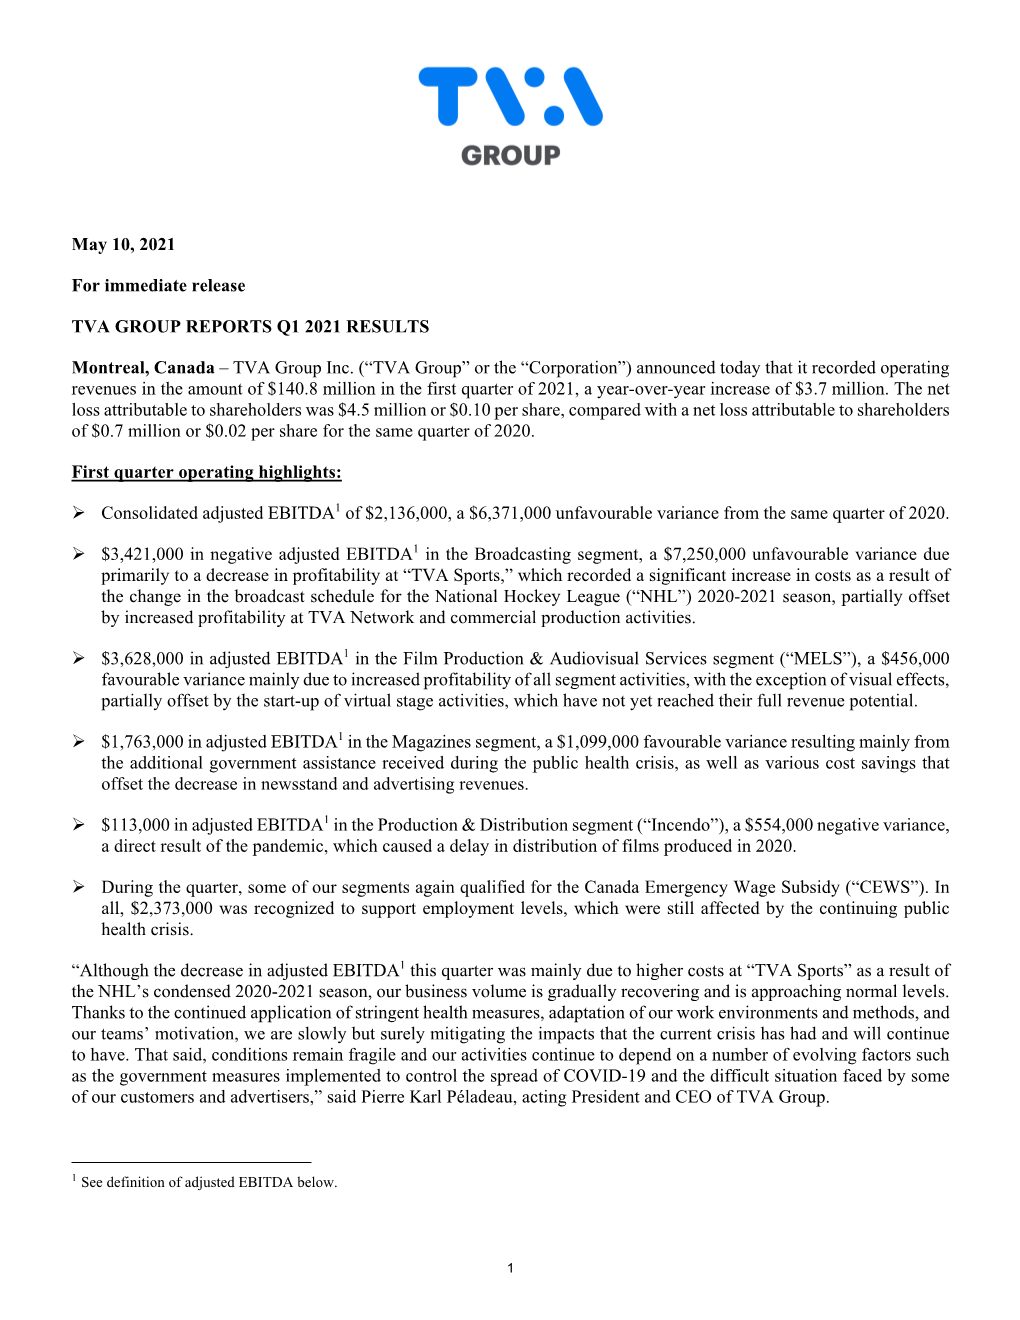 May 10, 2021 for Immediate Release TVA GROUP